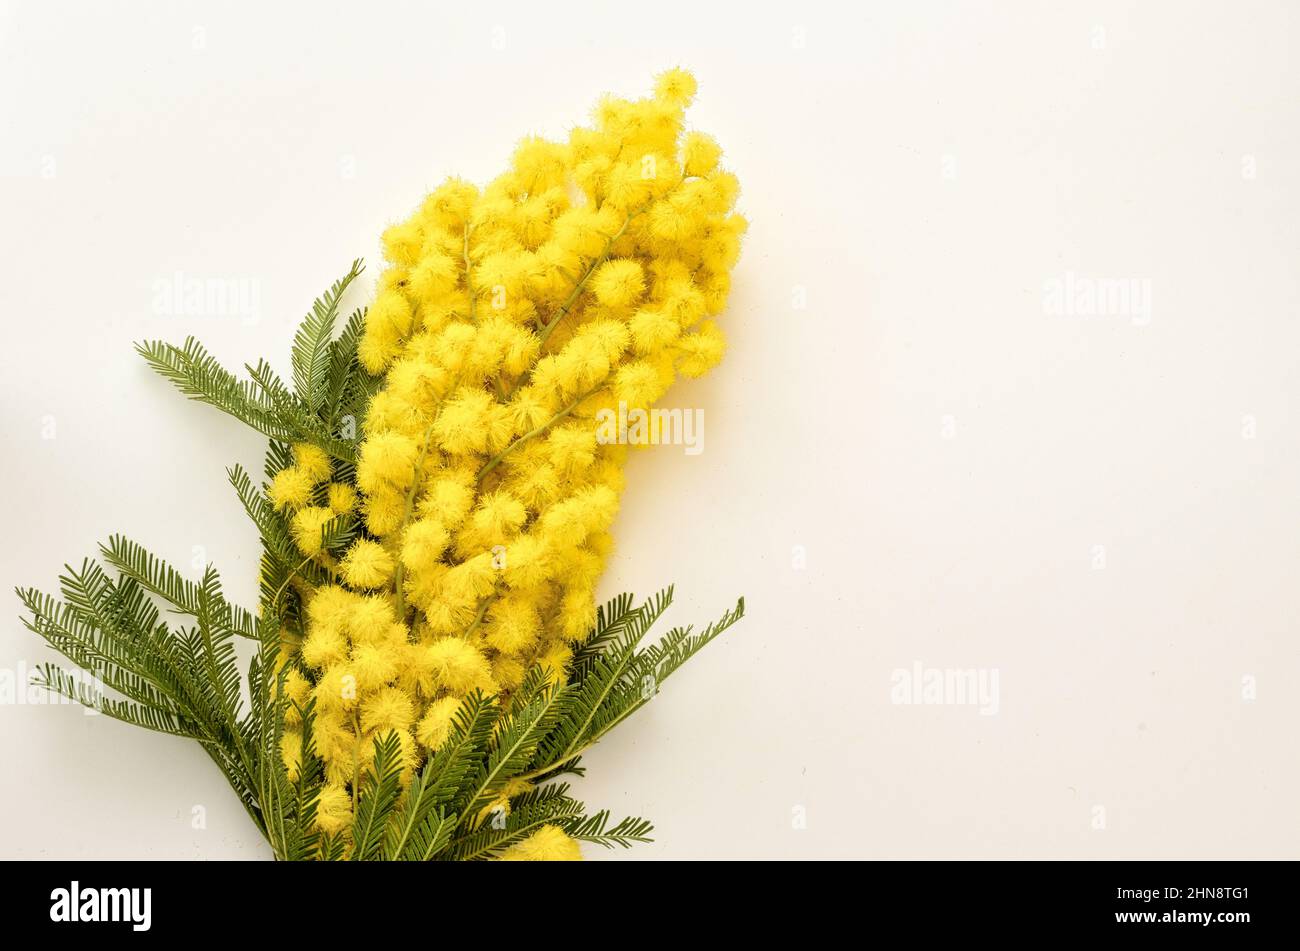 floral arrangement made up of a bunch of mimosa (Acacia dealbata) on the occasion of March 8 ,celebration of Women’s Day. Stock Photo